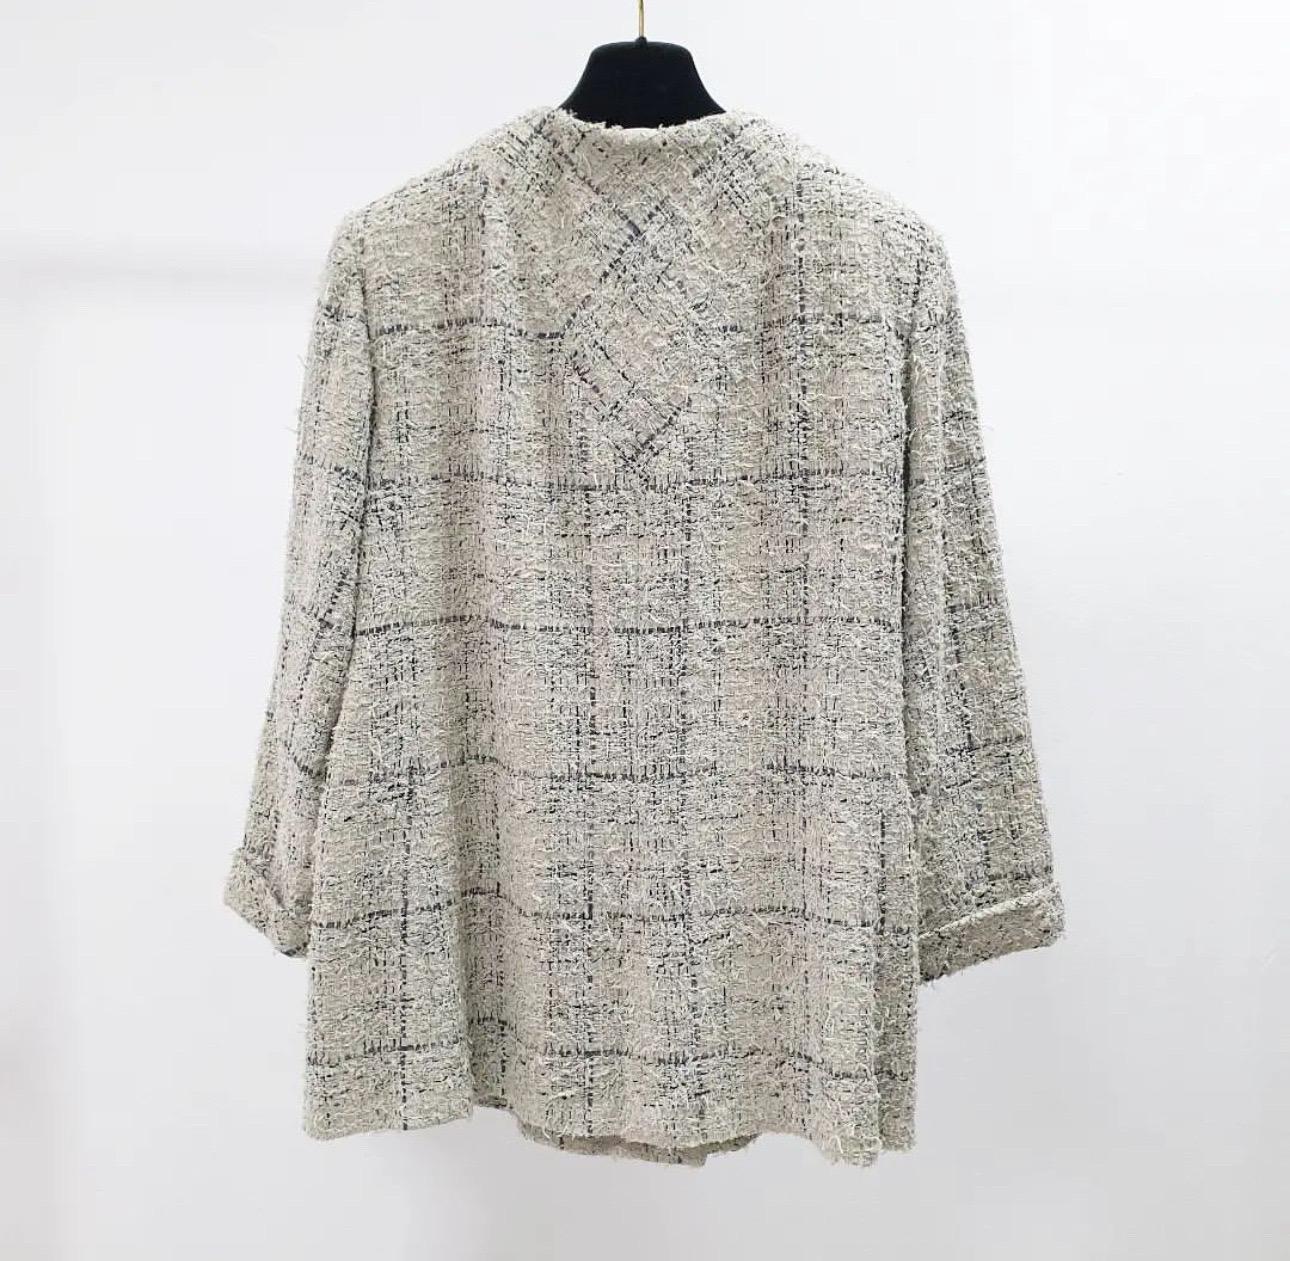 CHANEL Cruise Collection 2015 Tweed Jacket In Good Condition For Sale In Krakow, PL